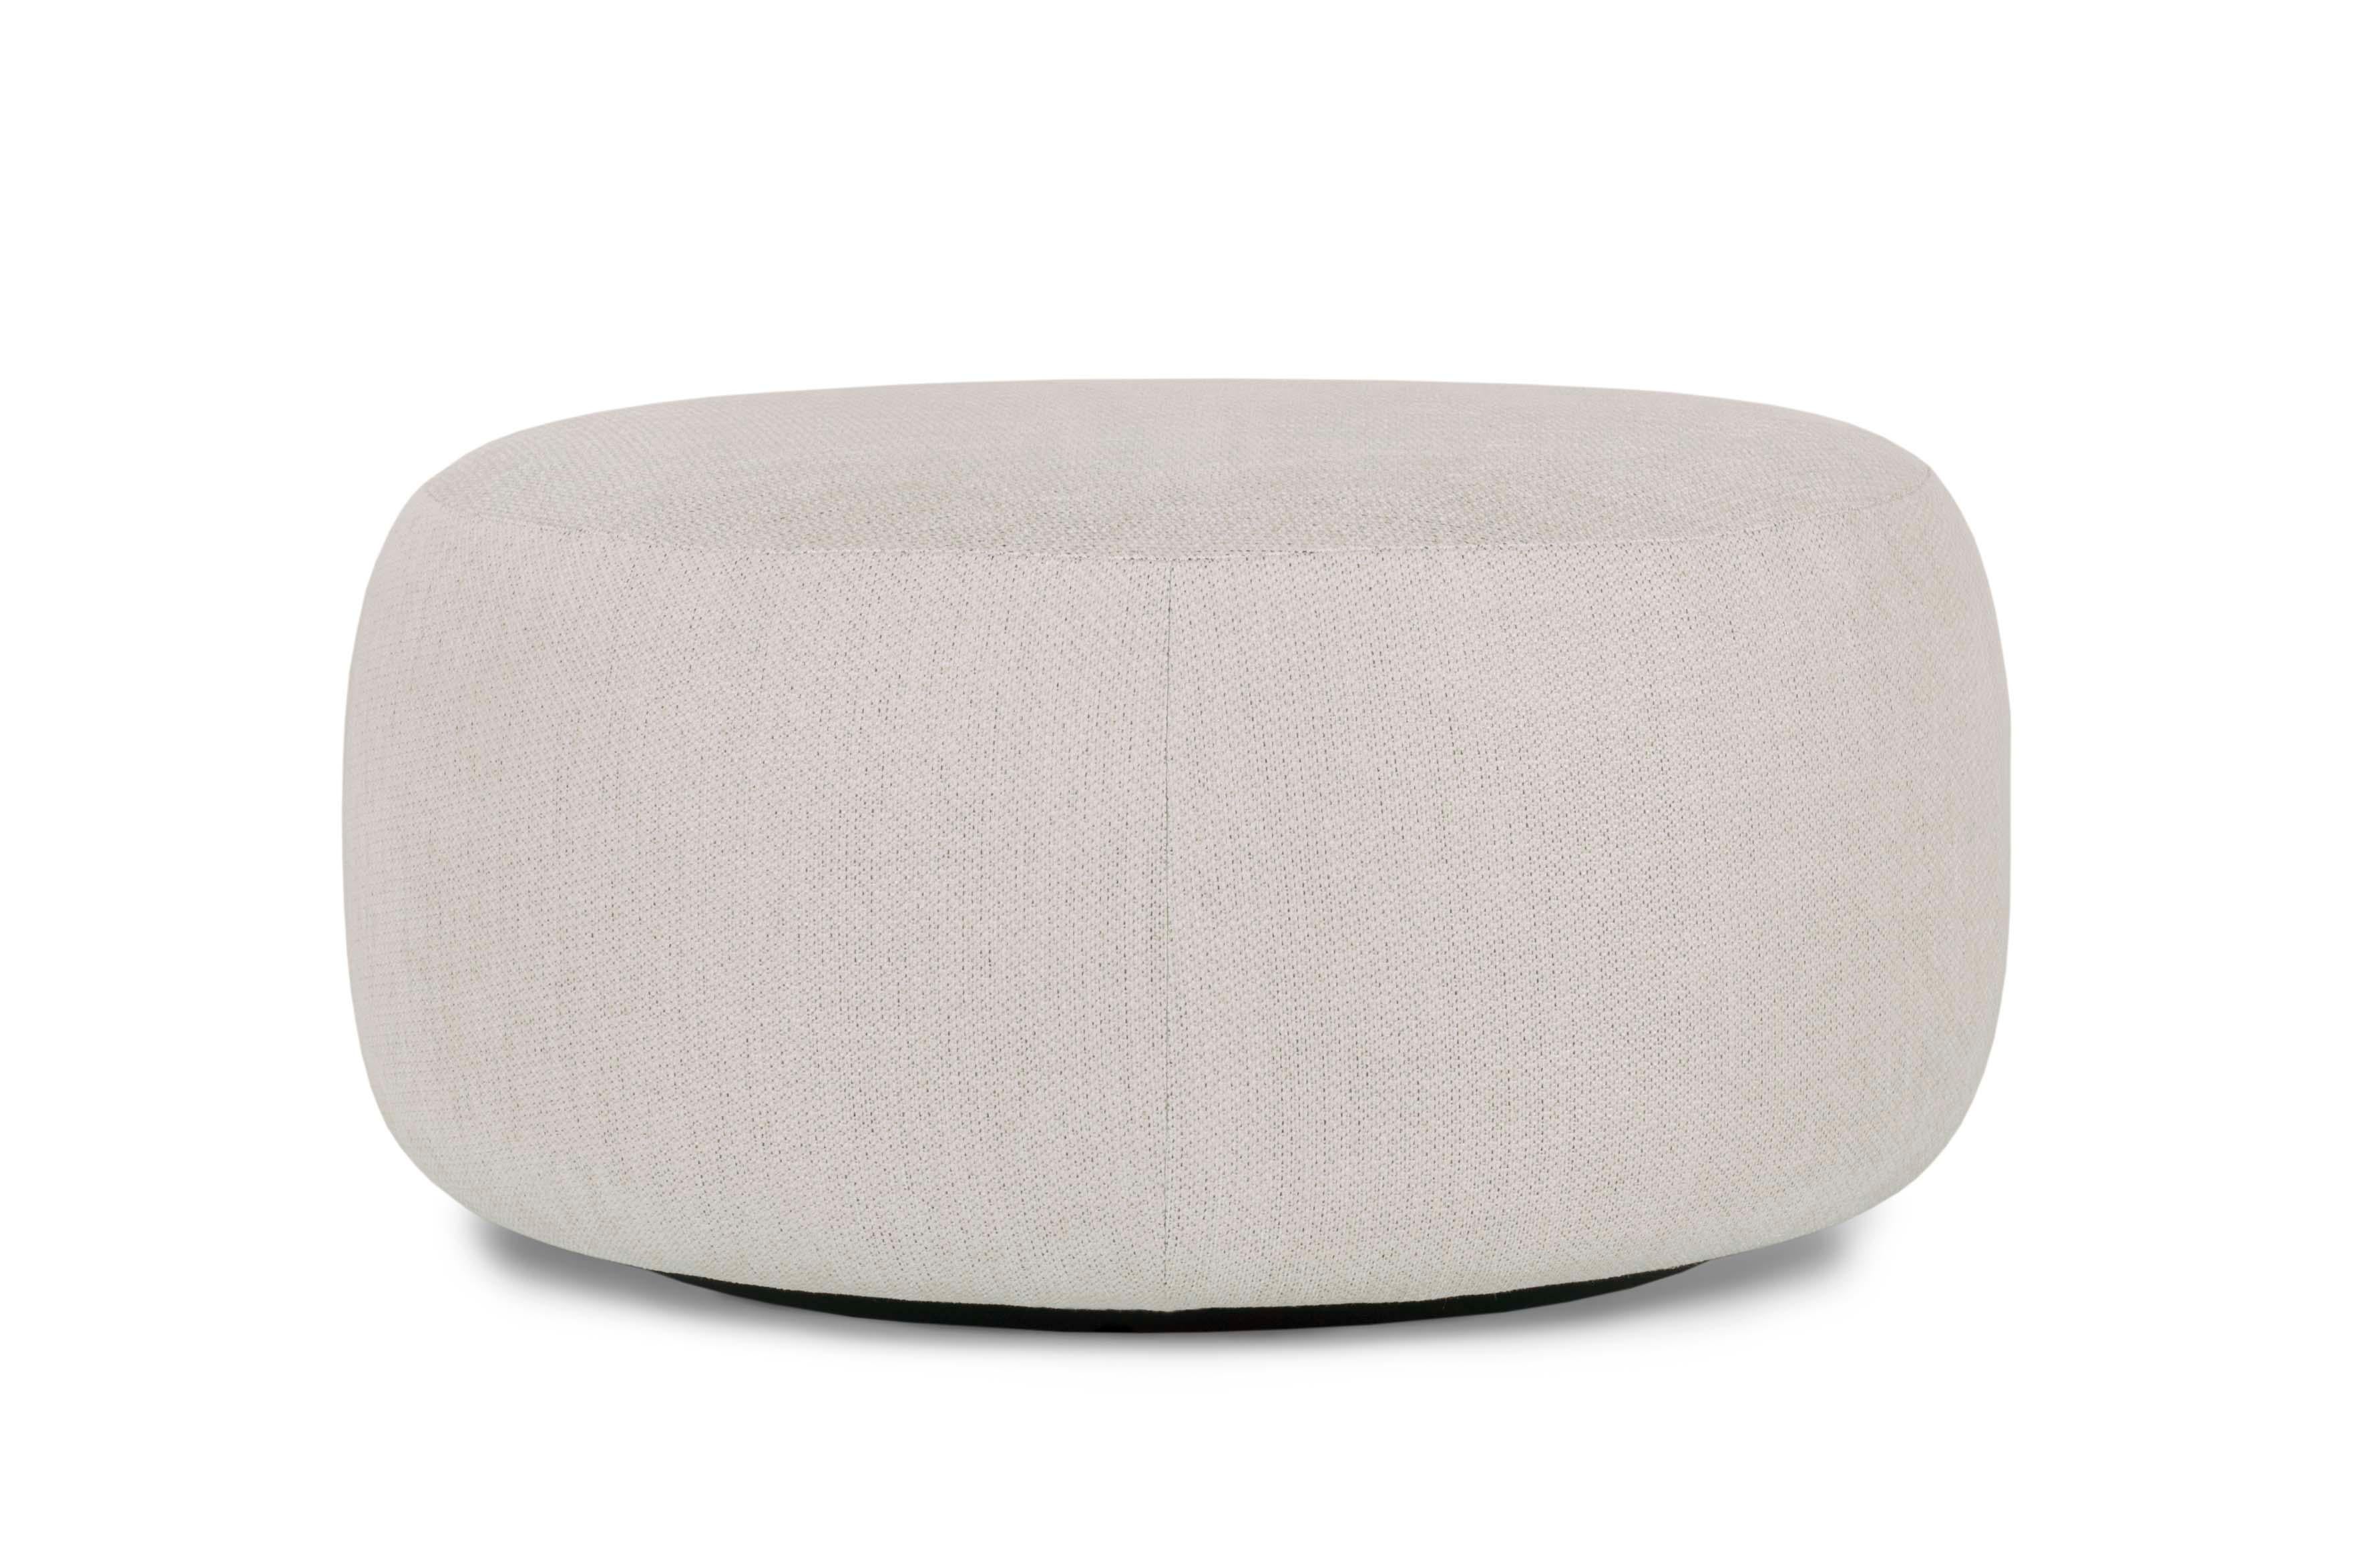 Lacquered Modern Twins Pouf Ottoman, Beige Cotton Linen, Handmade Portugal by Greenapple For Sale